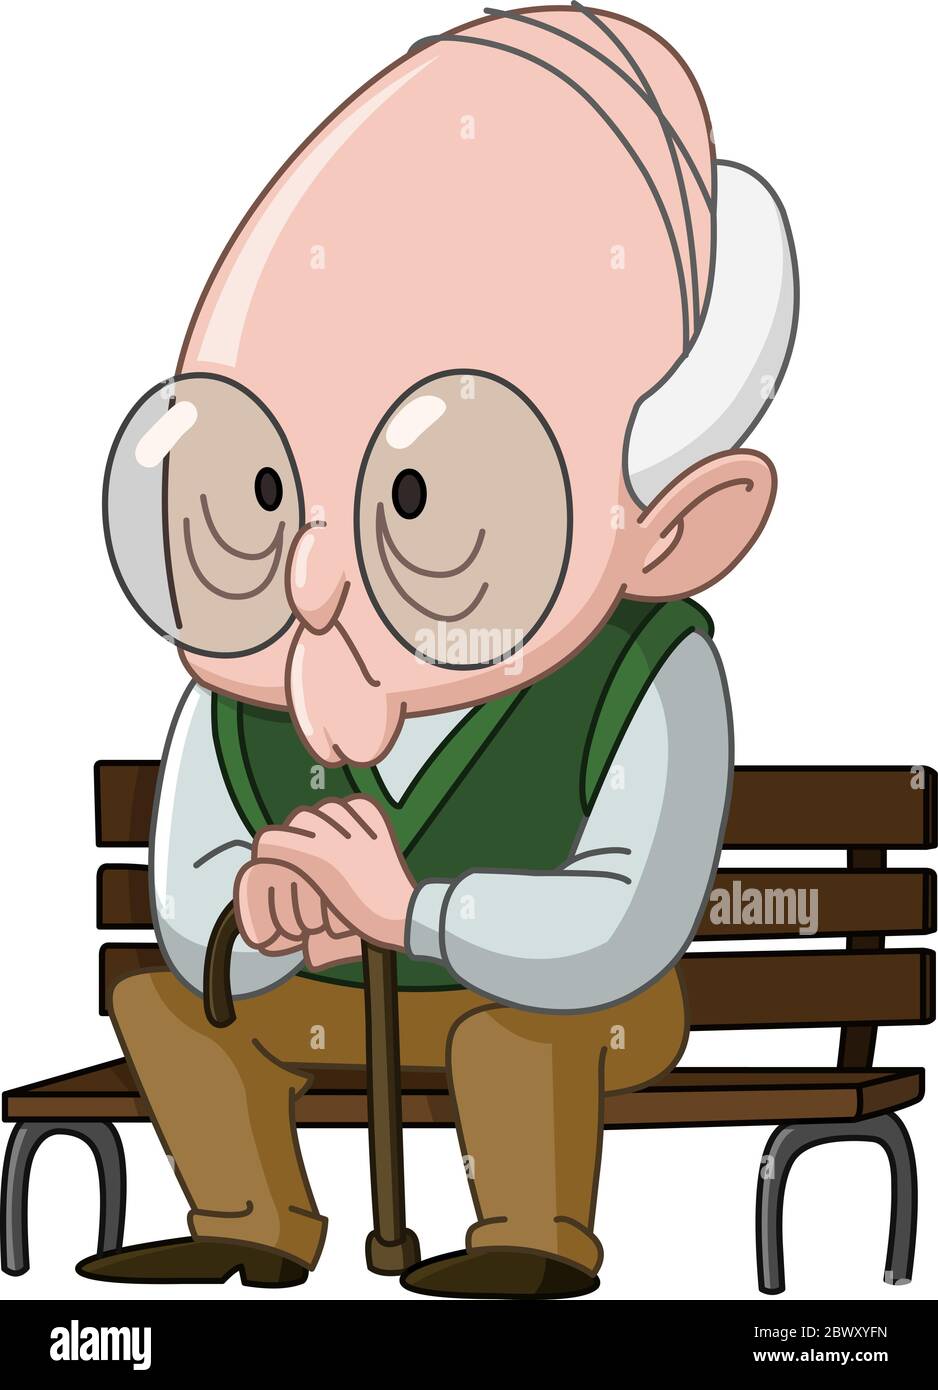 Old man with a cane sitting on a wooden bench Stock Vector